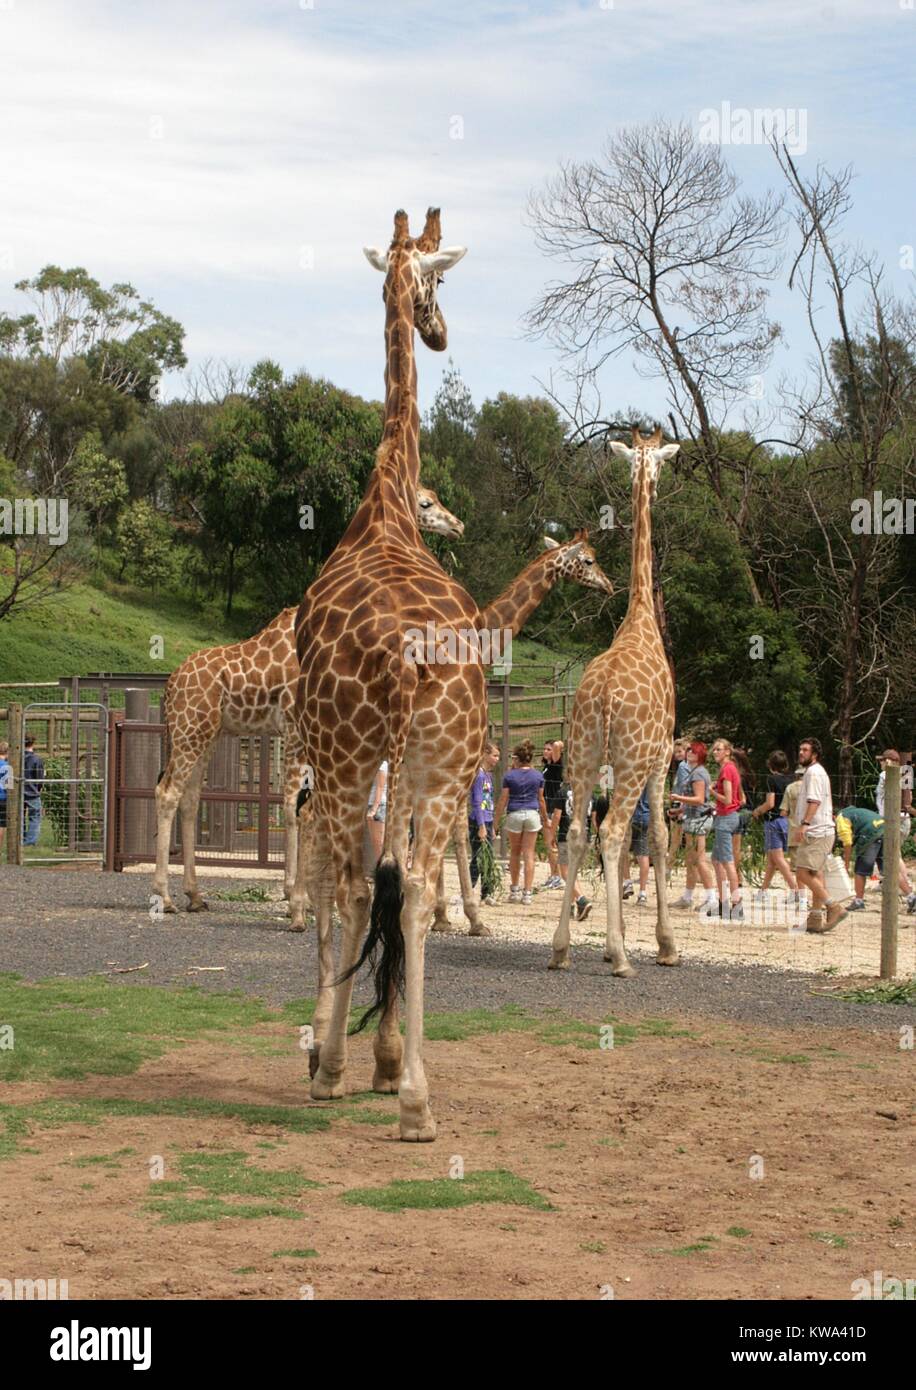 A family of giraffes watching visitors at the Werribee Open Range Zoo, Melbourne, Australia. Stock Photo